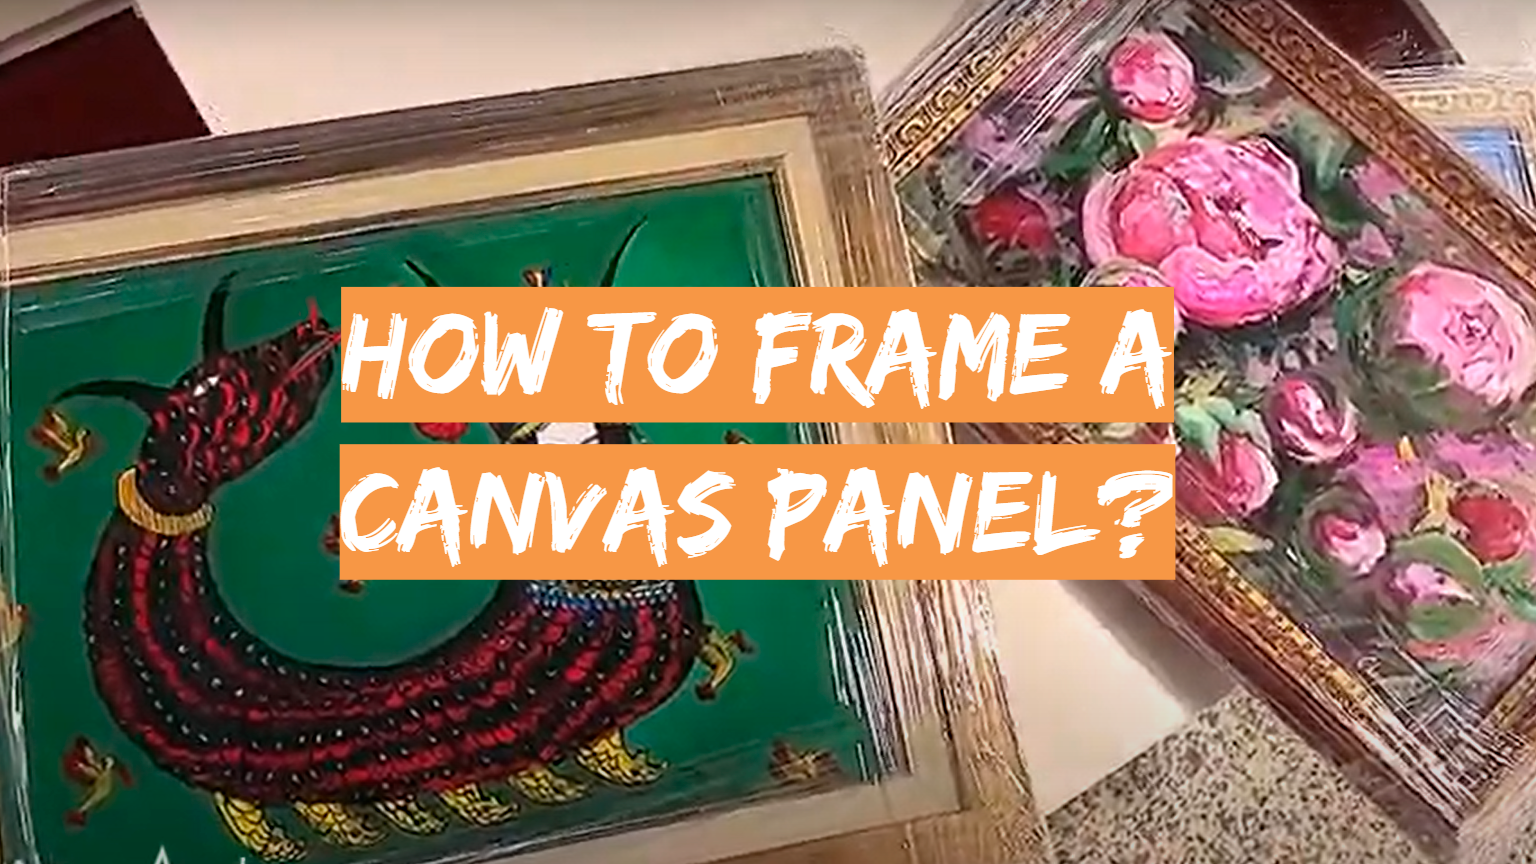 How to Frame a Canvas Panel?